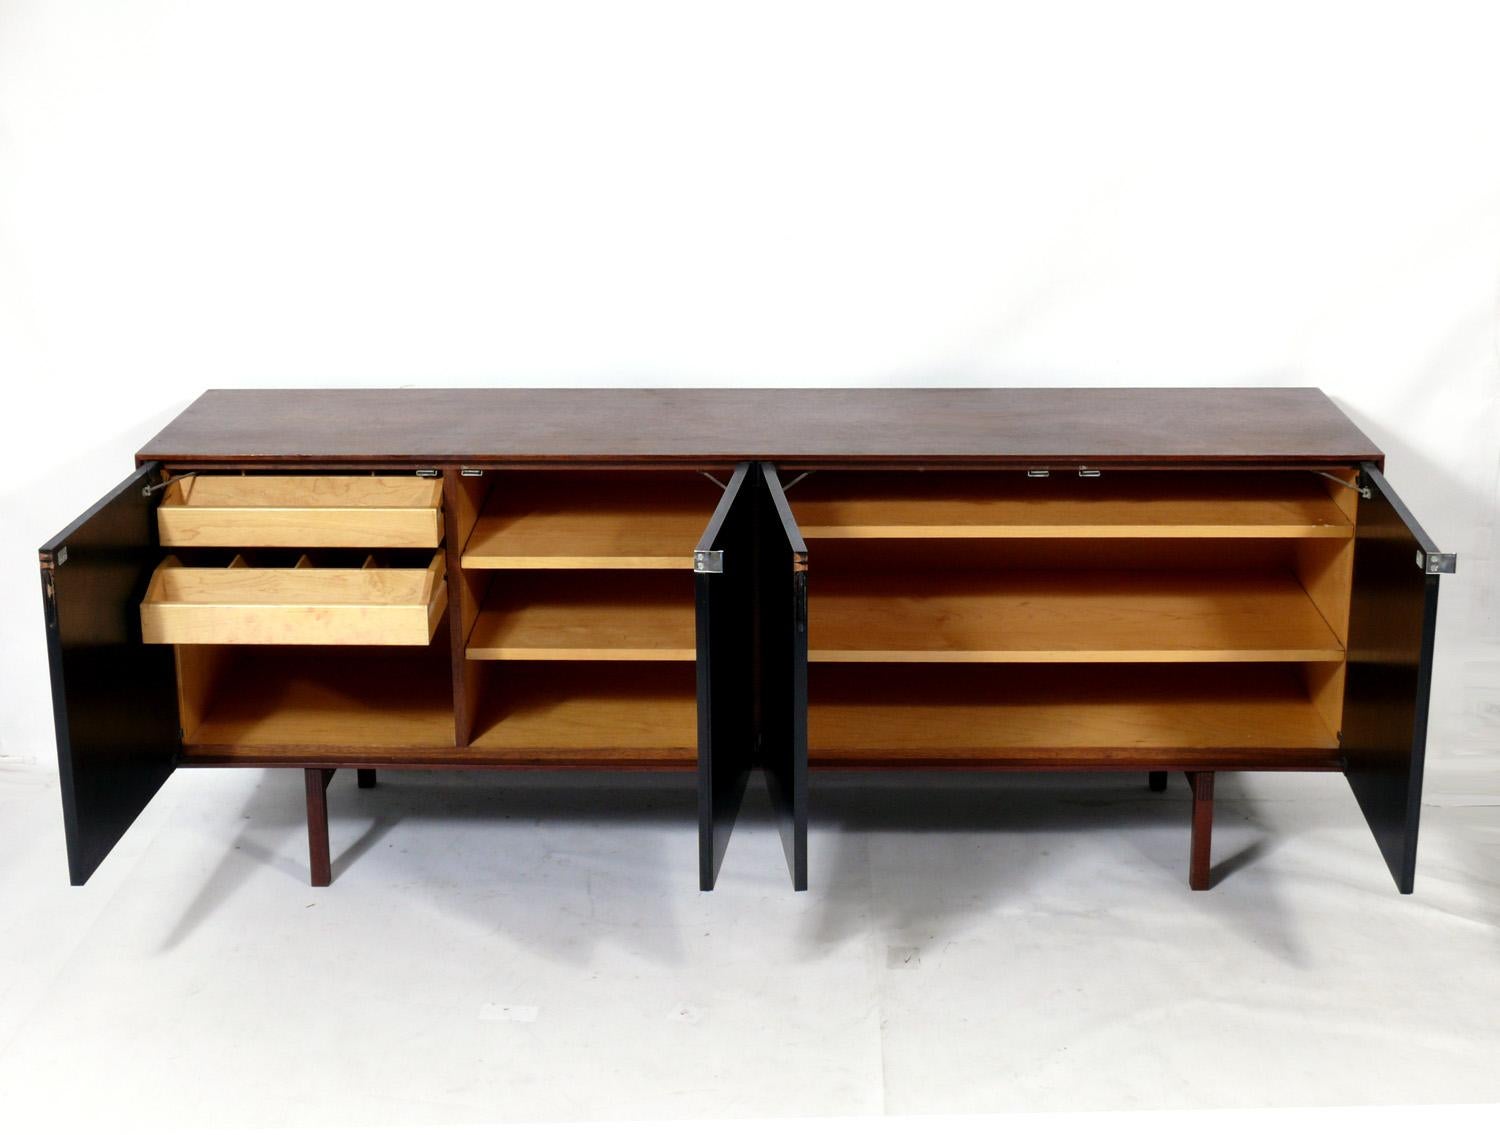 Clean lined walnut and black lacquered credenza, designed by Florence Knoll for Knoll, circa 1950s. Signed with early Knoll tag underneath. This piece is a versatile size and can be used as a credenza, TV/Media cabinet, bar, or server in a living